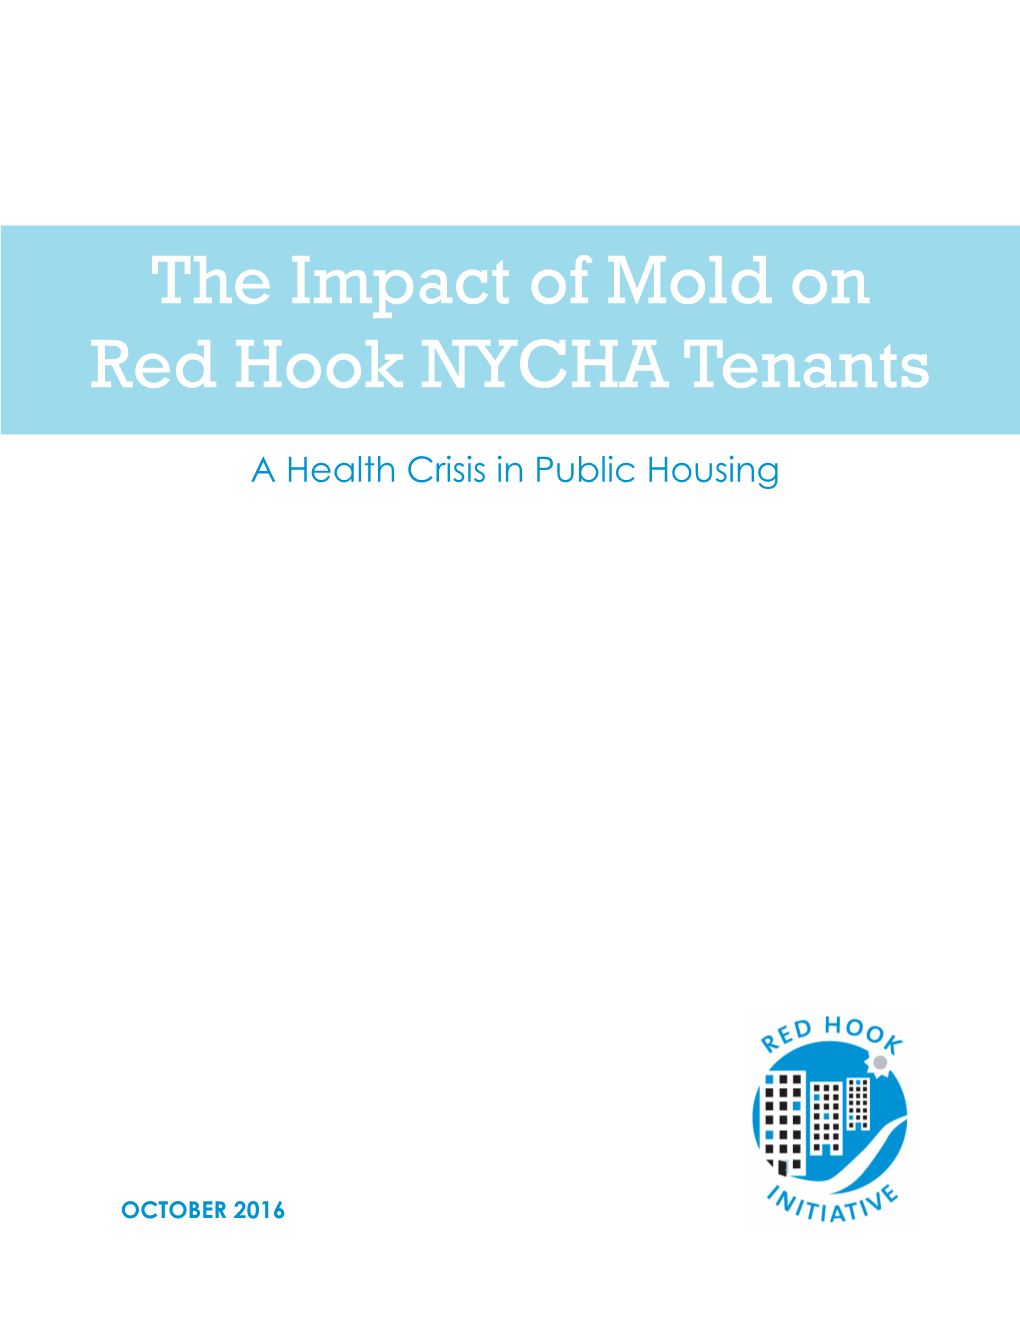 The Impact of Mold on Red Hook NYCHA Tenants